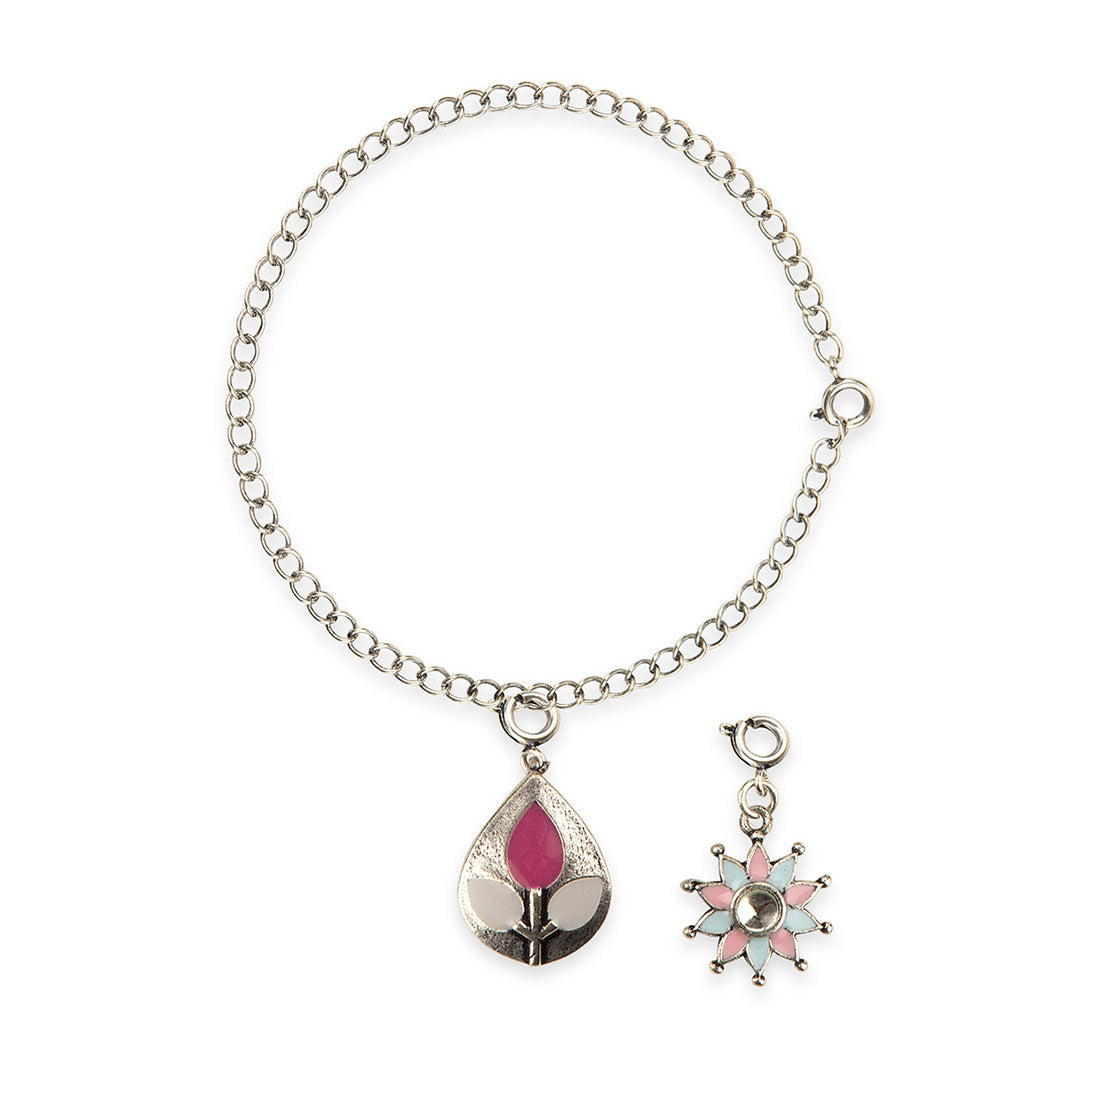 Enameled Teardrop And Floral Charms Pendant with Bracelet